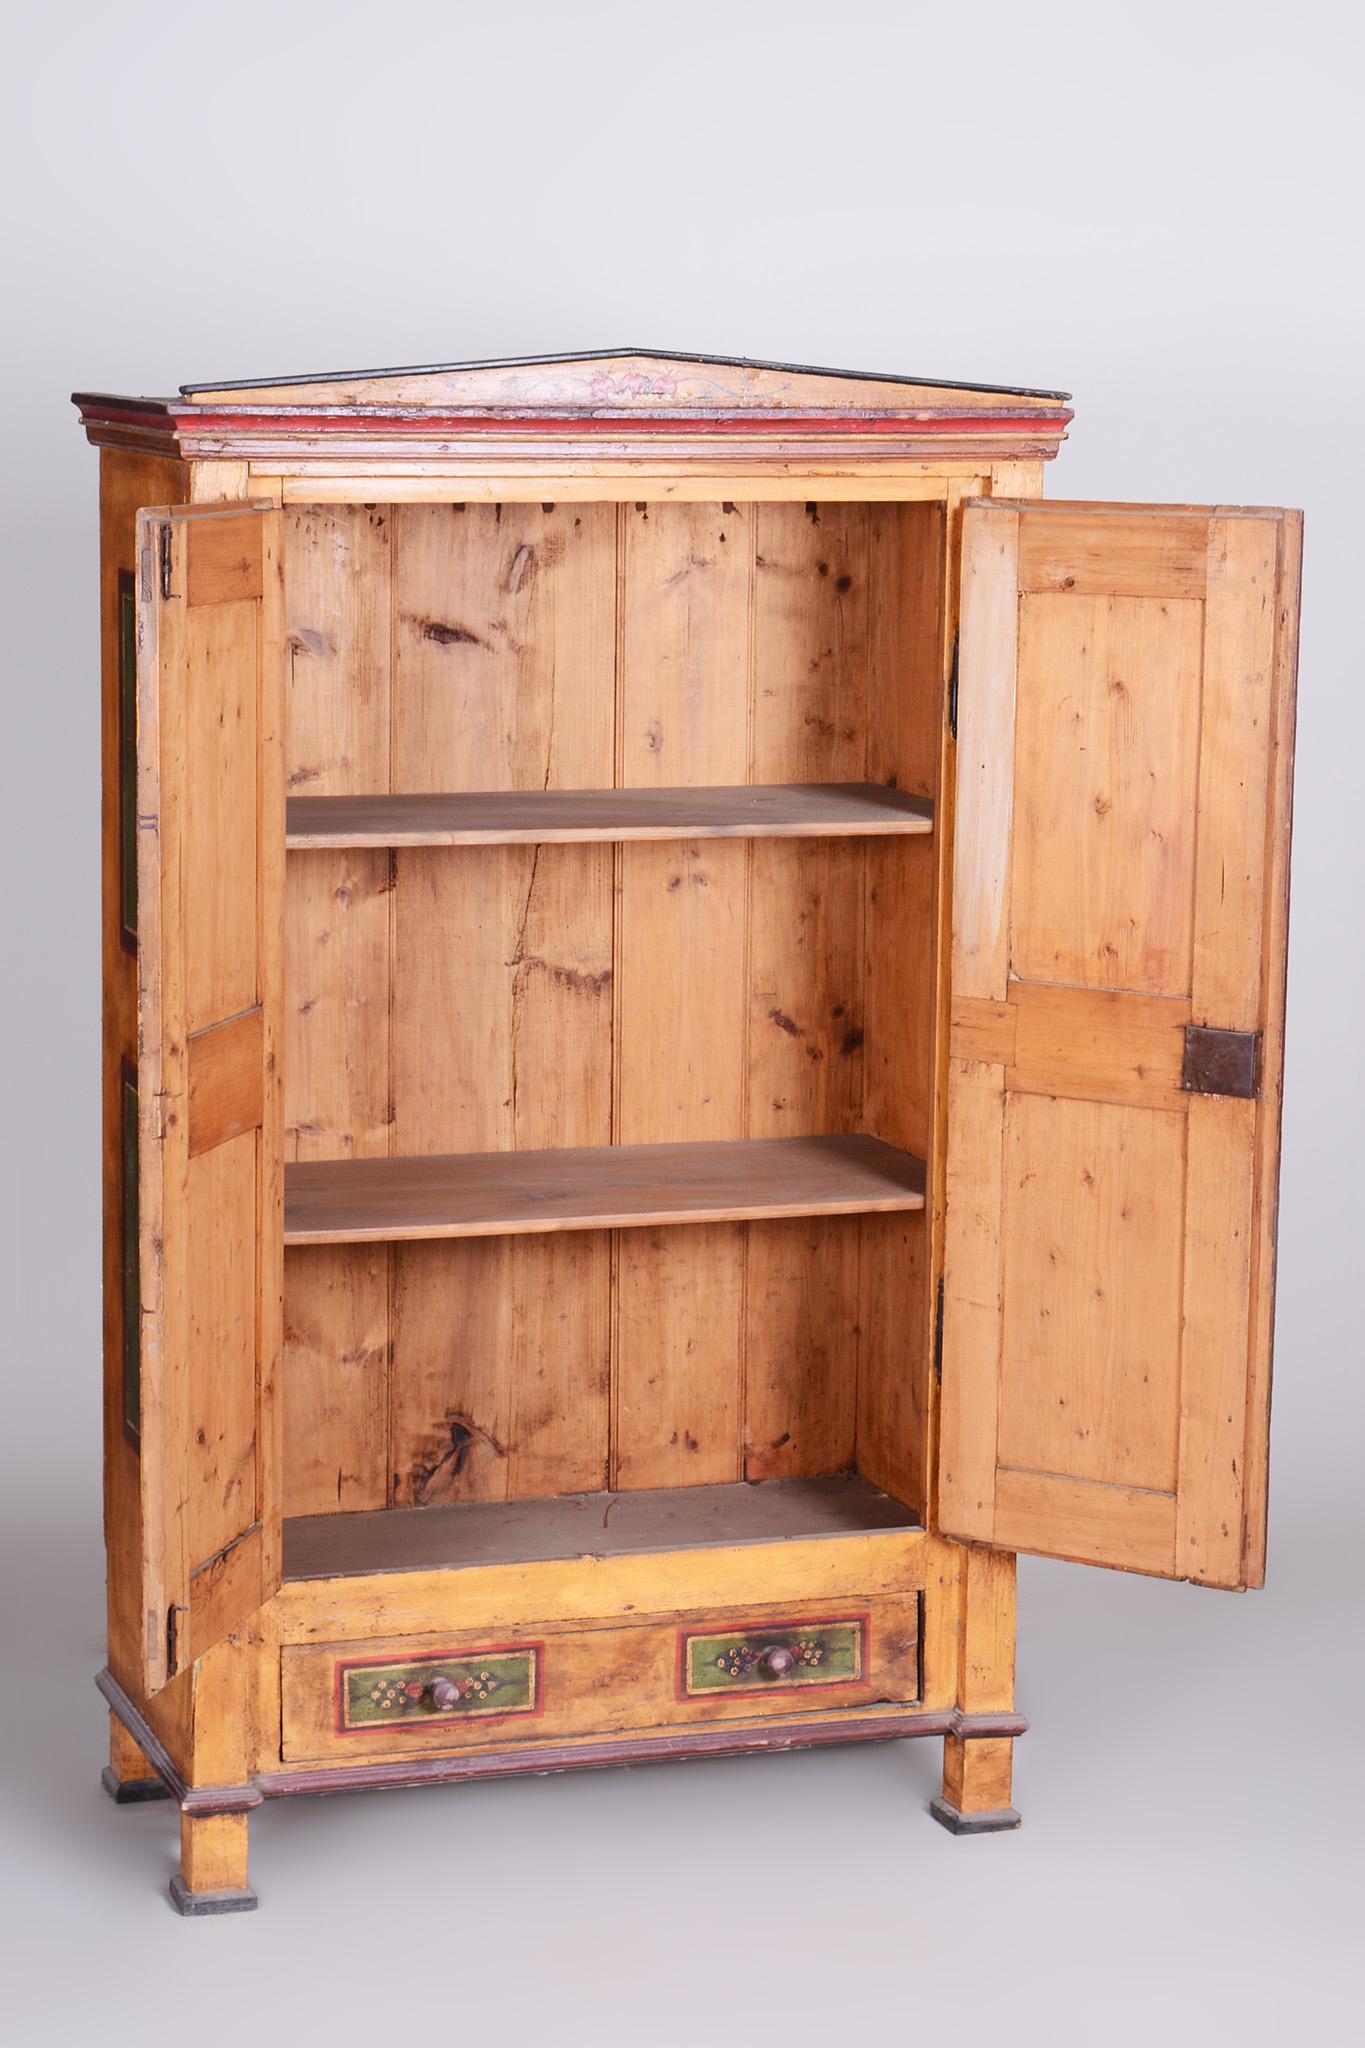 Restored Biedermeier Spruce Wardrobe With Original Paintings.

Source: Czechia
Period: 1800-1809
Material: Spruce

Professionally restored. 

This item features classic Biedermeier elements. This style is characterized by visual simplicity,